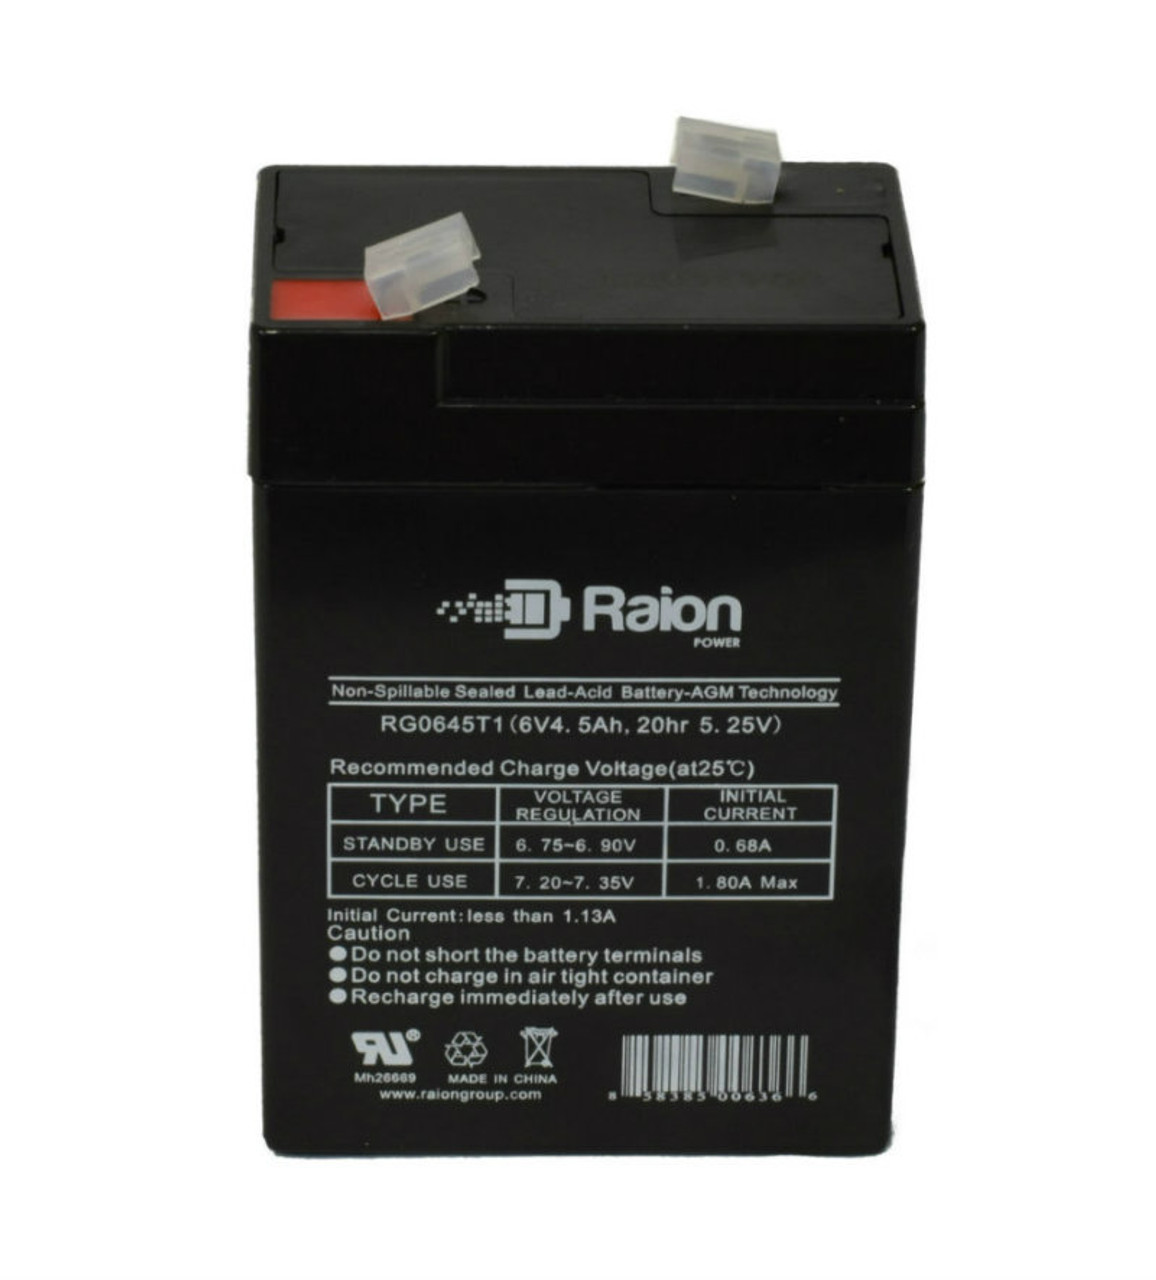 Raion Power RG0645T1 Replacement Battery Cartridge for Baxter Healthcare 521 Microate Inf Pump